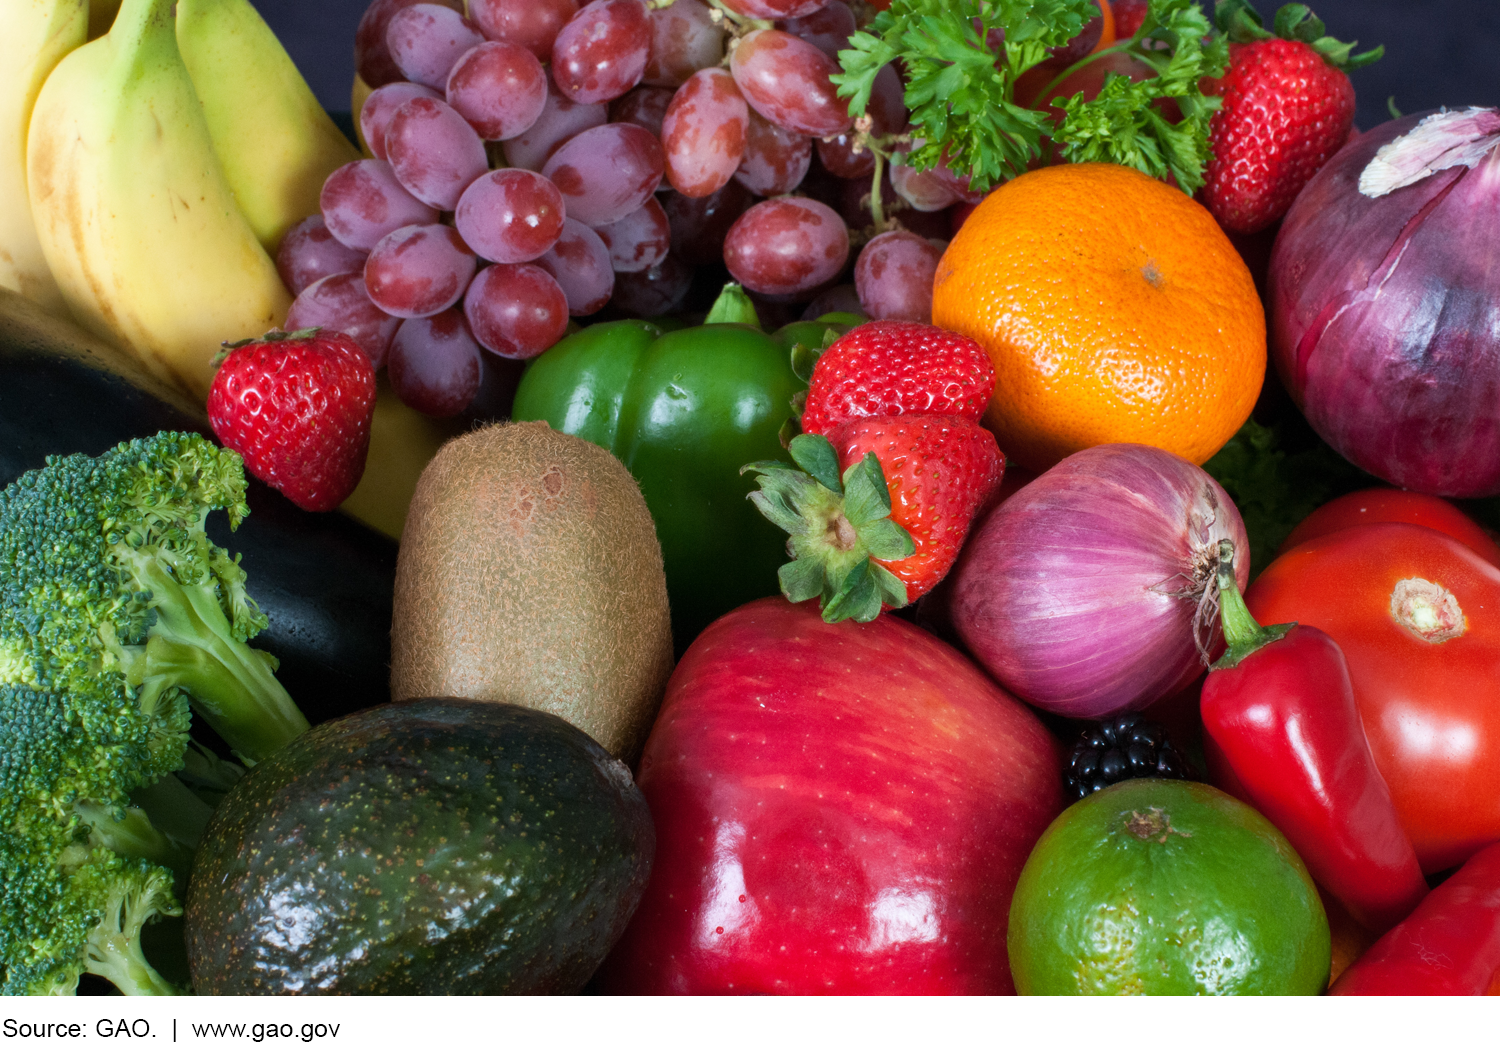 Photo showing a variety of fruits and vegetables.